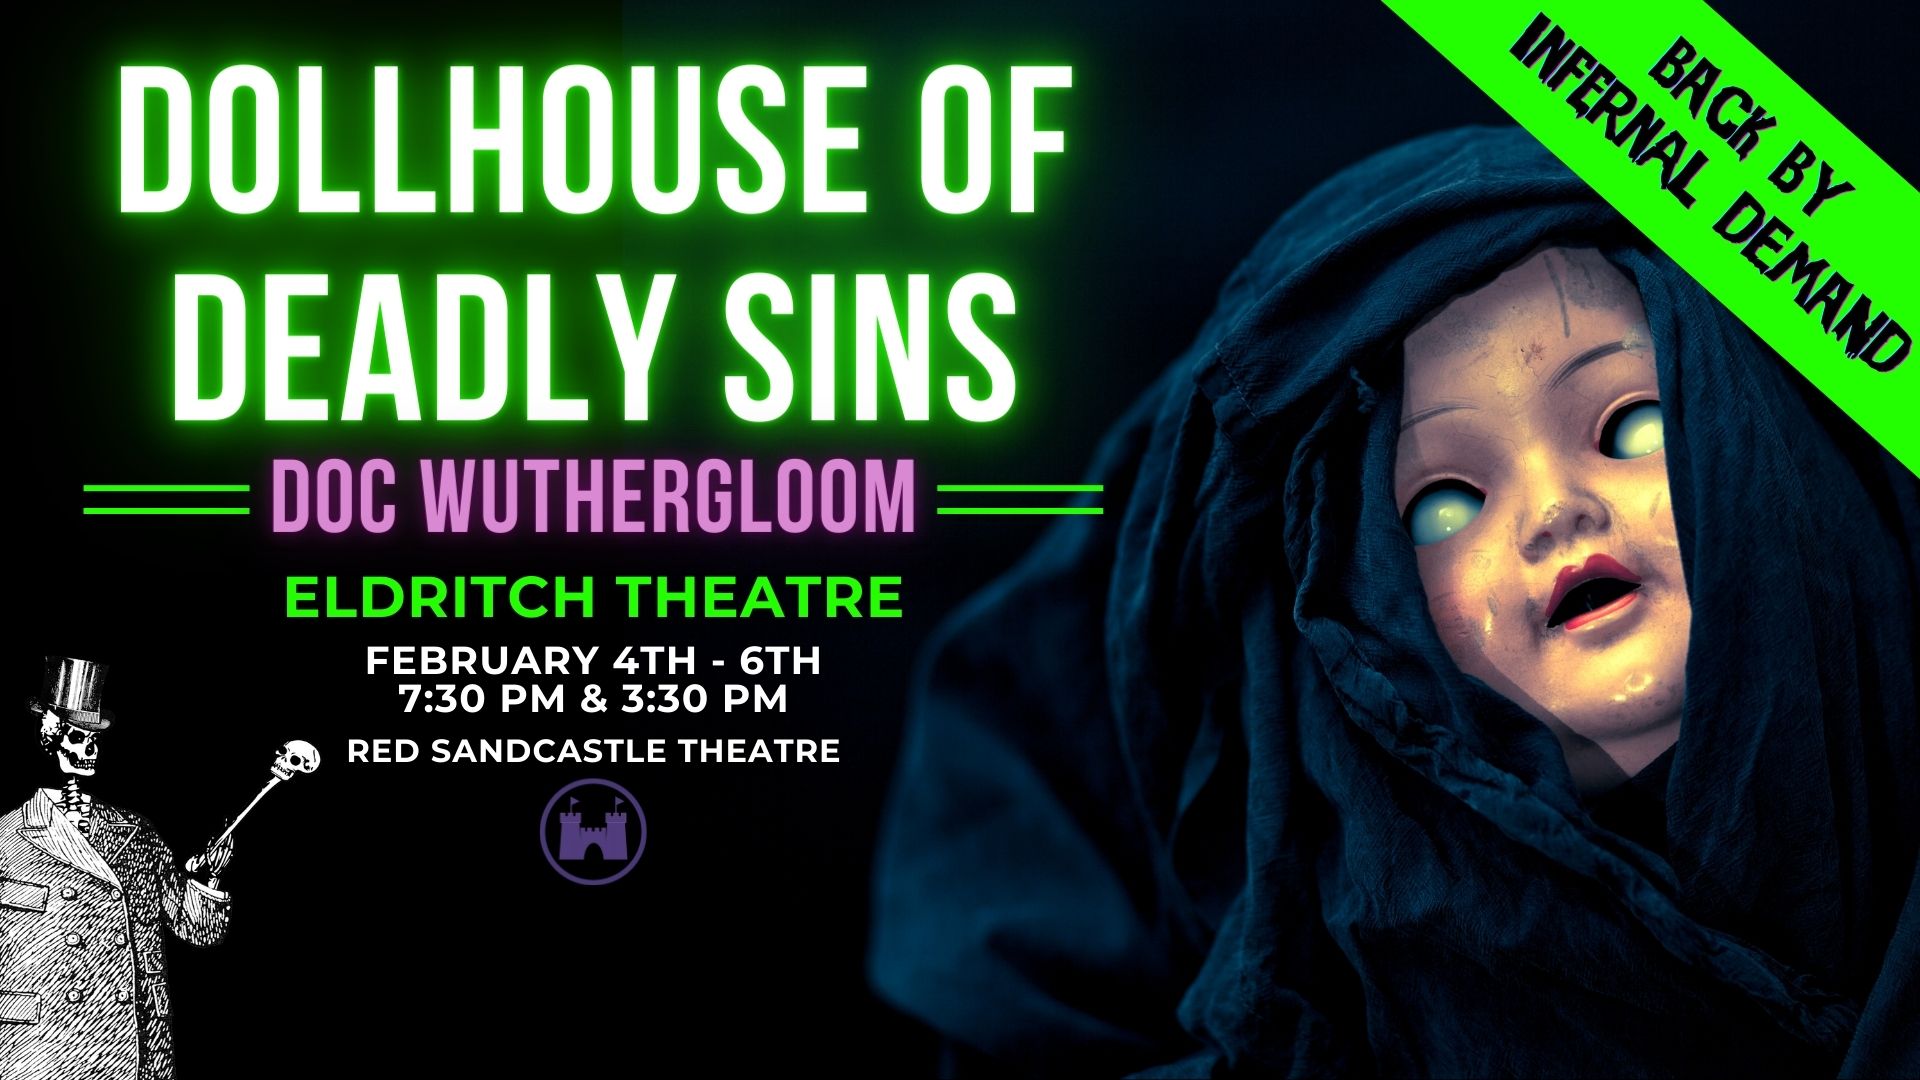 Doc Wutherloom’s Dollhouse of Deadly Sins